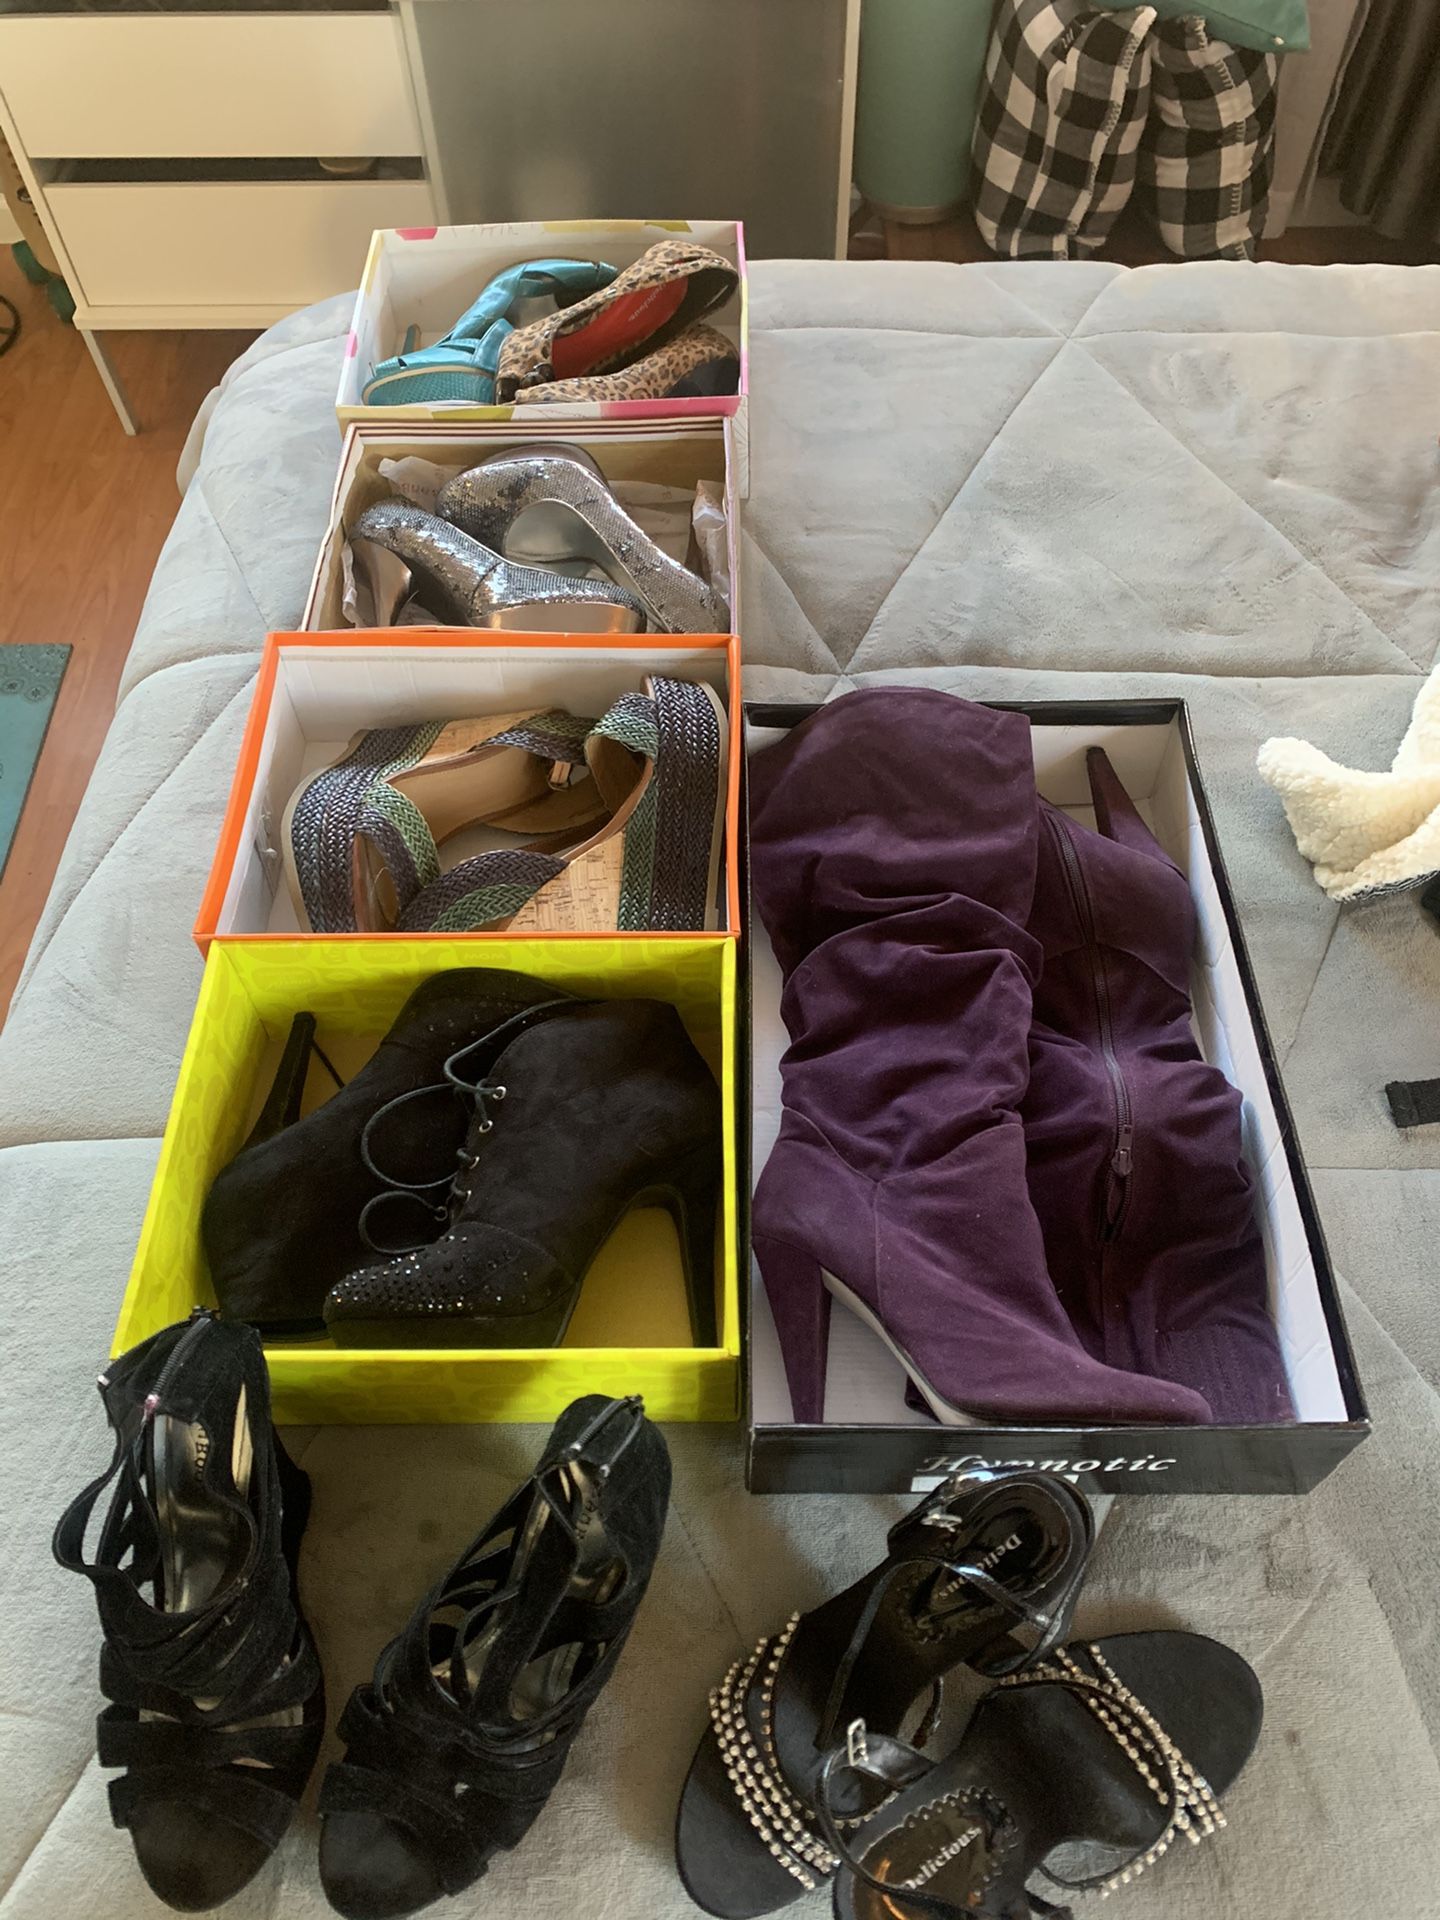 8 1/2 - 9 size shoes!!! $20, Selling all of them together or separately.